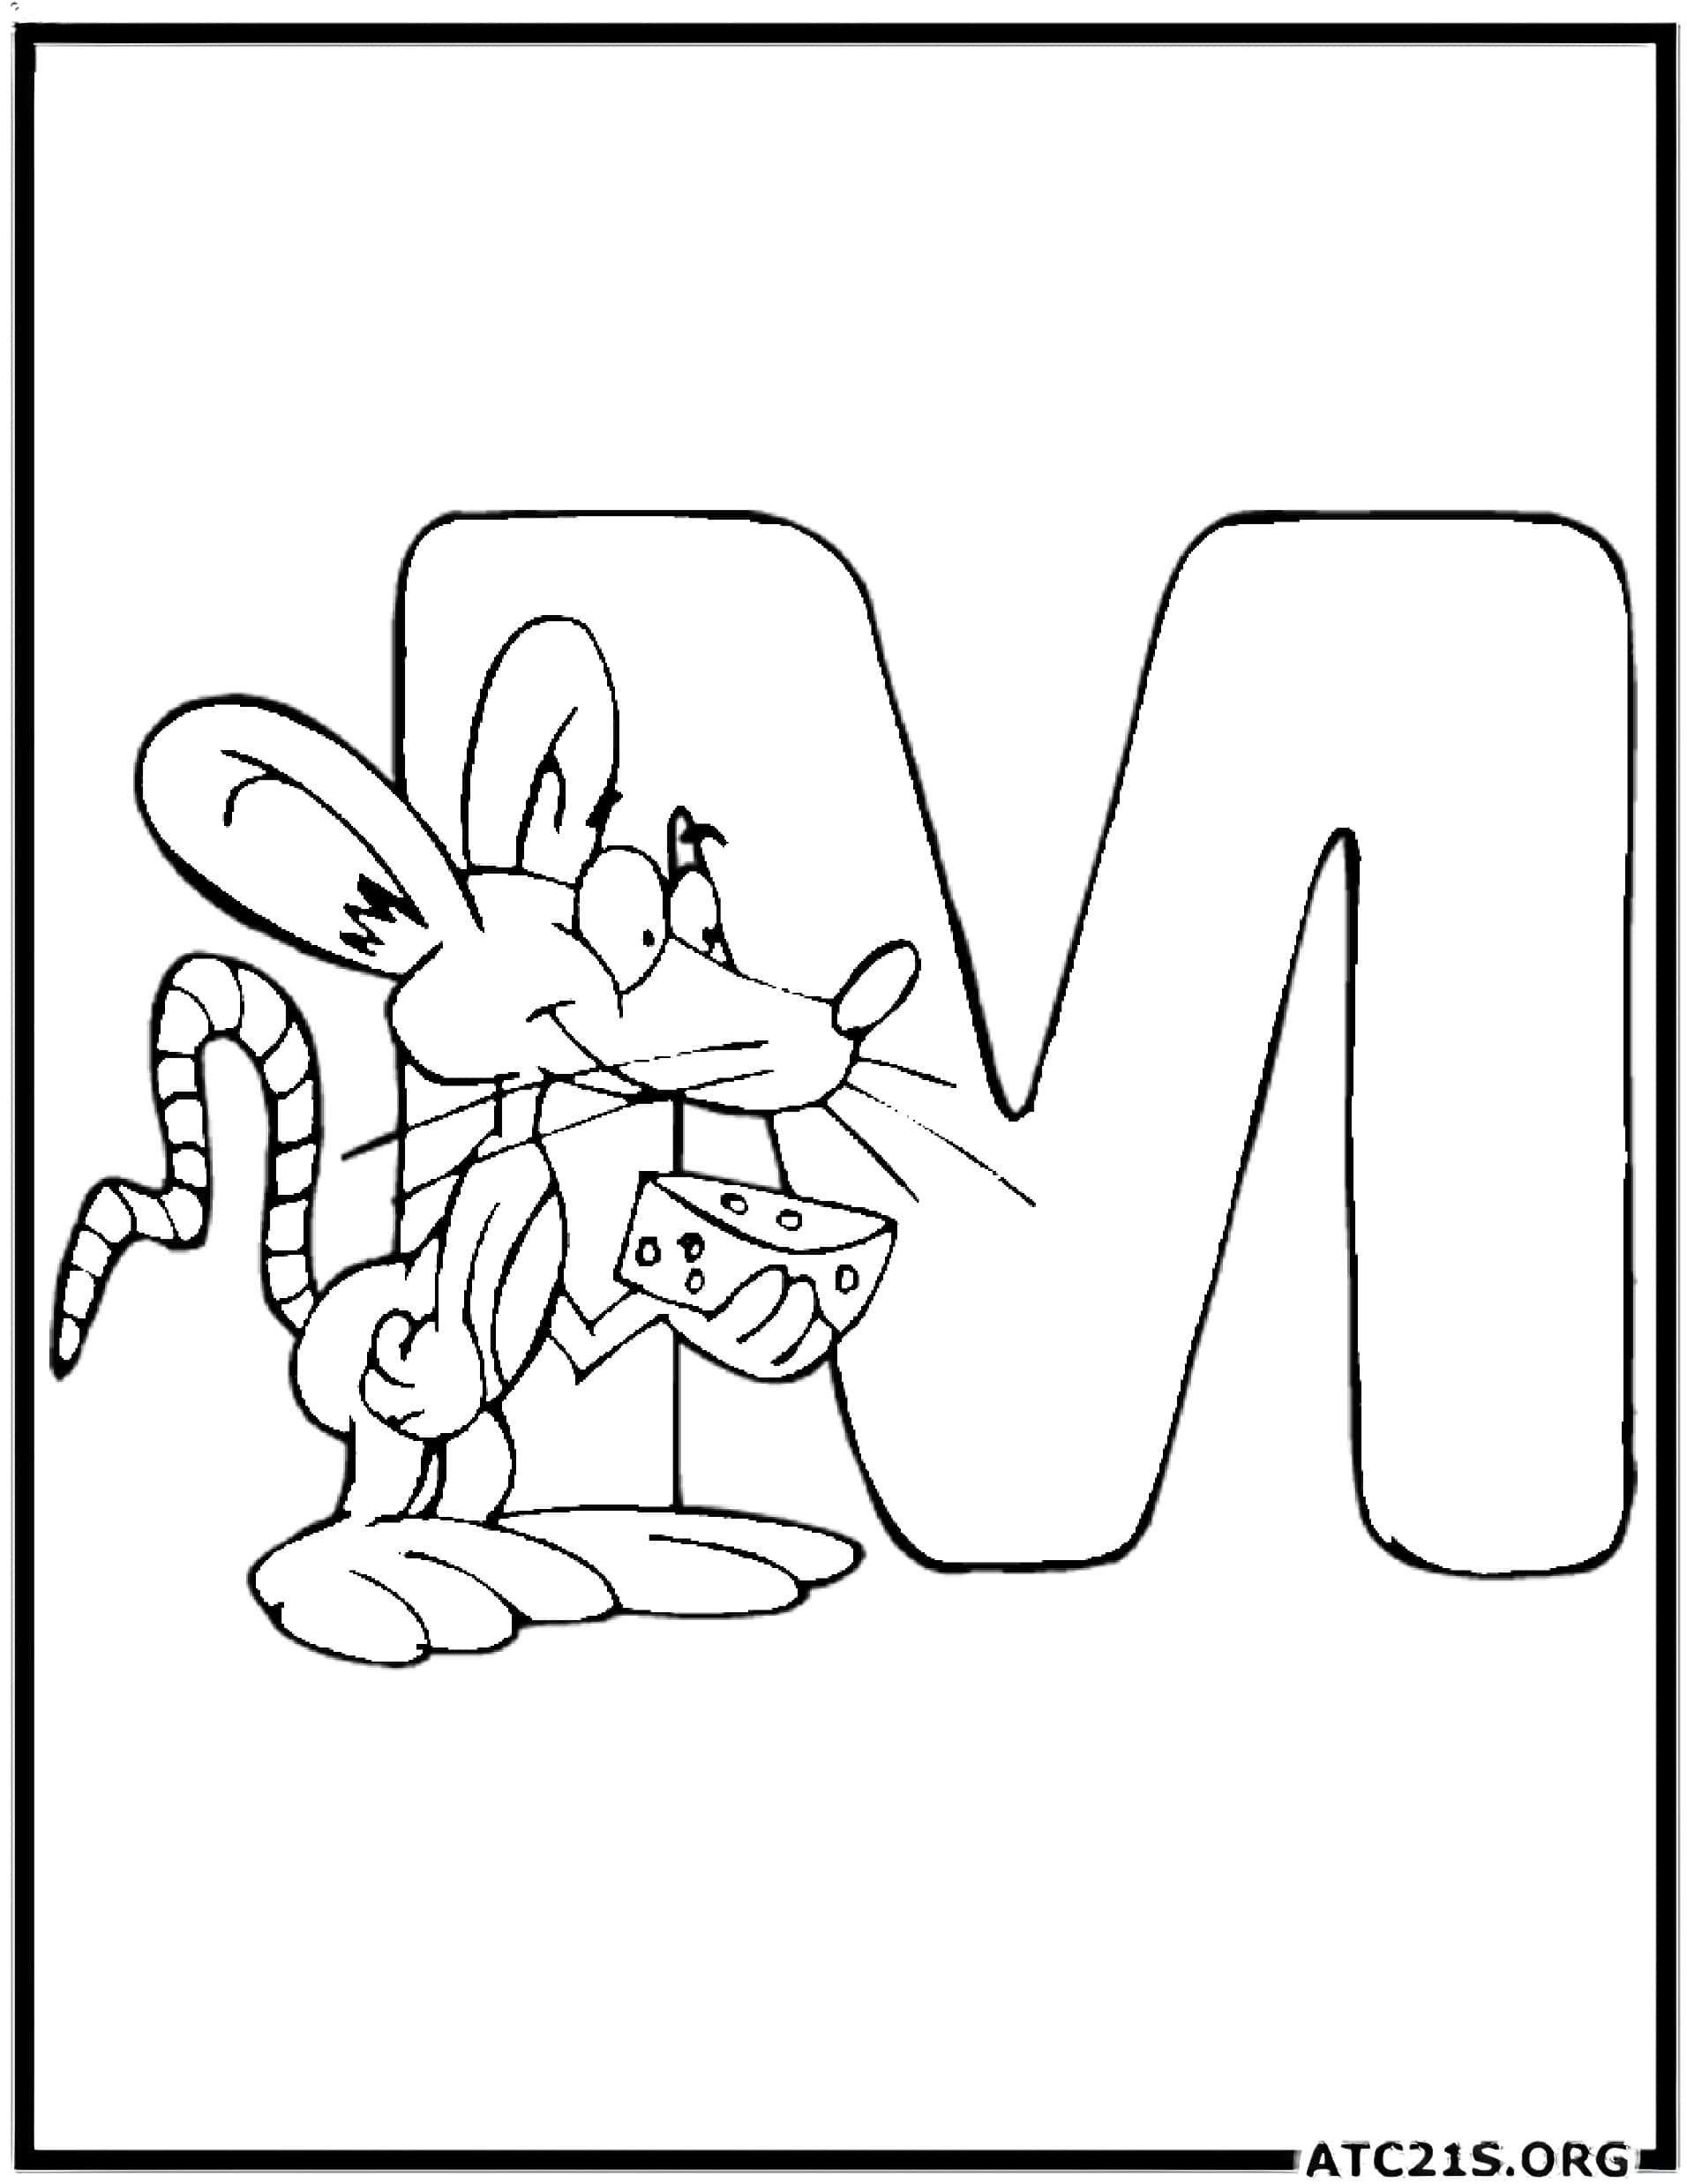 letter_m_coloring_page_1